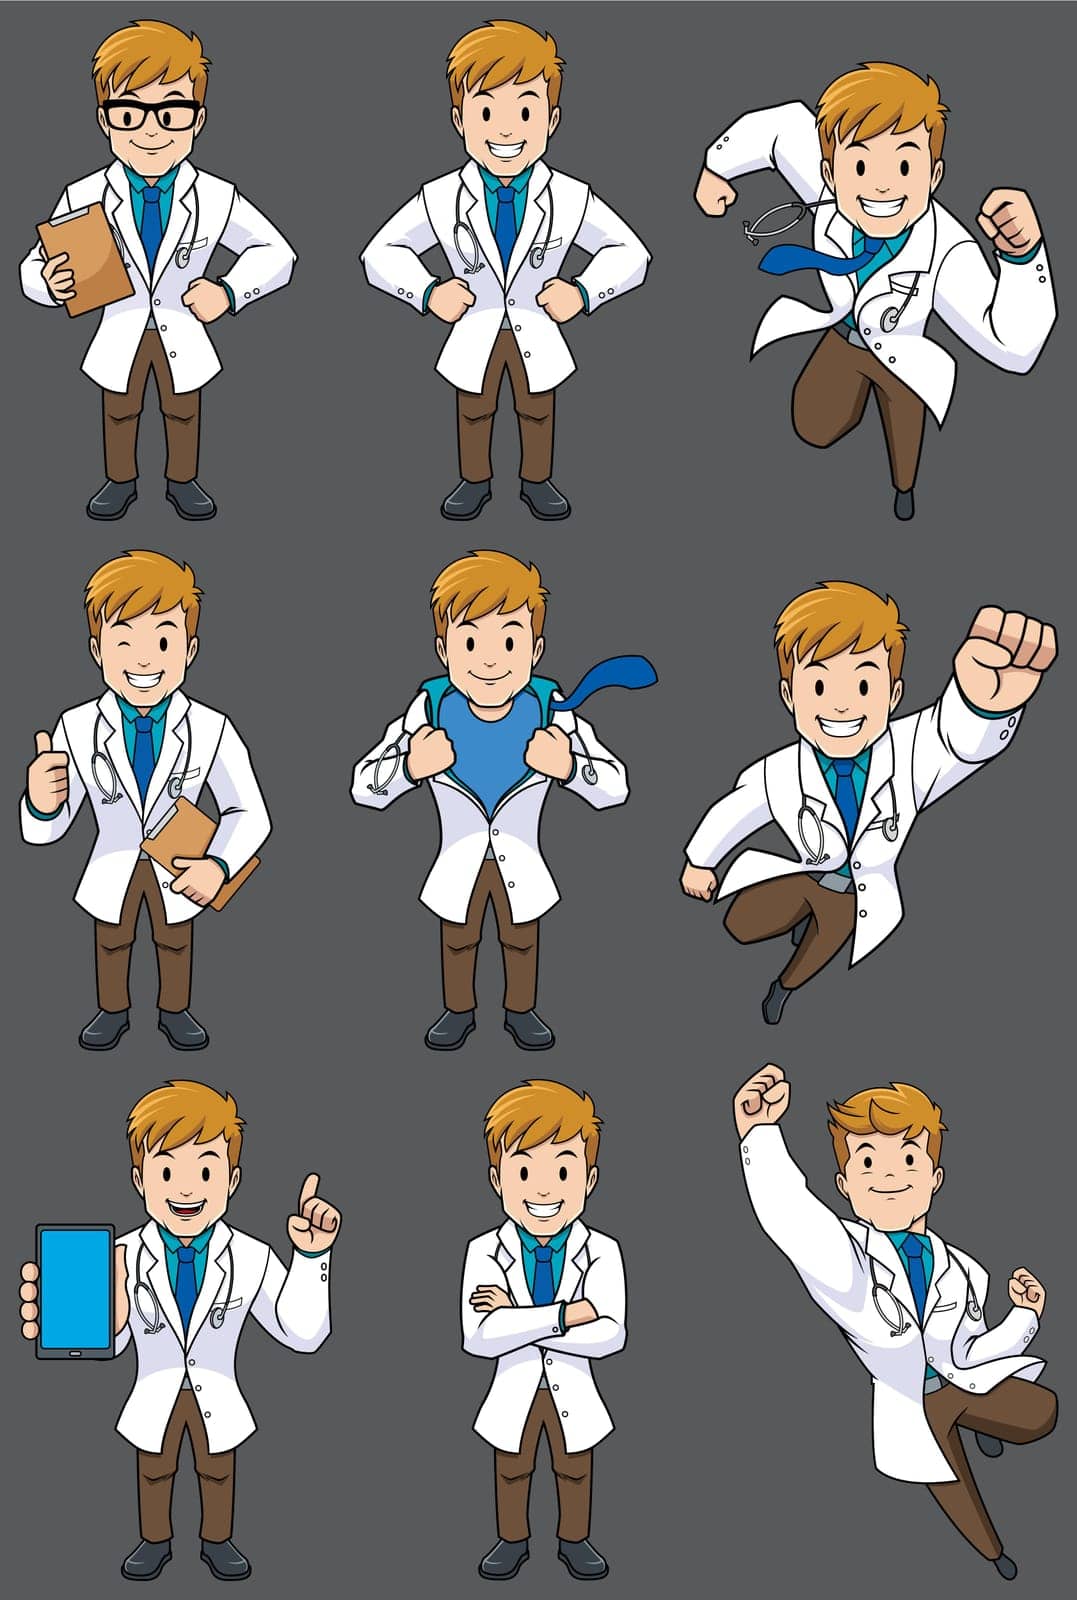 Set with cartoon medical doctor in different poses.